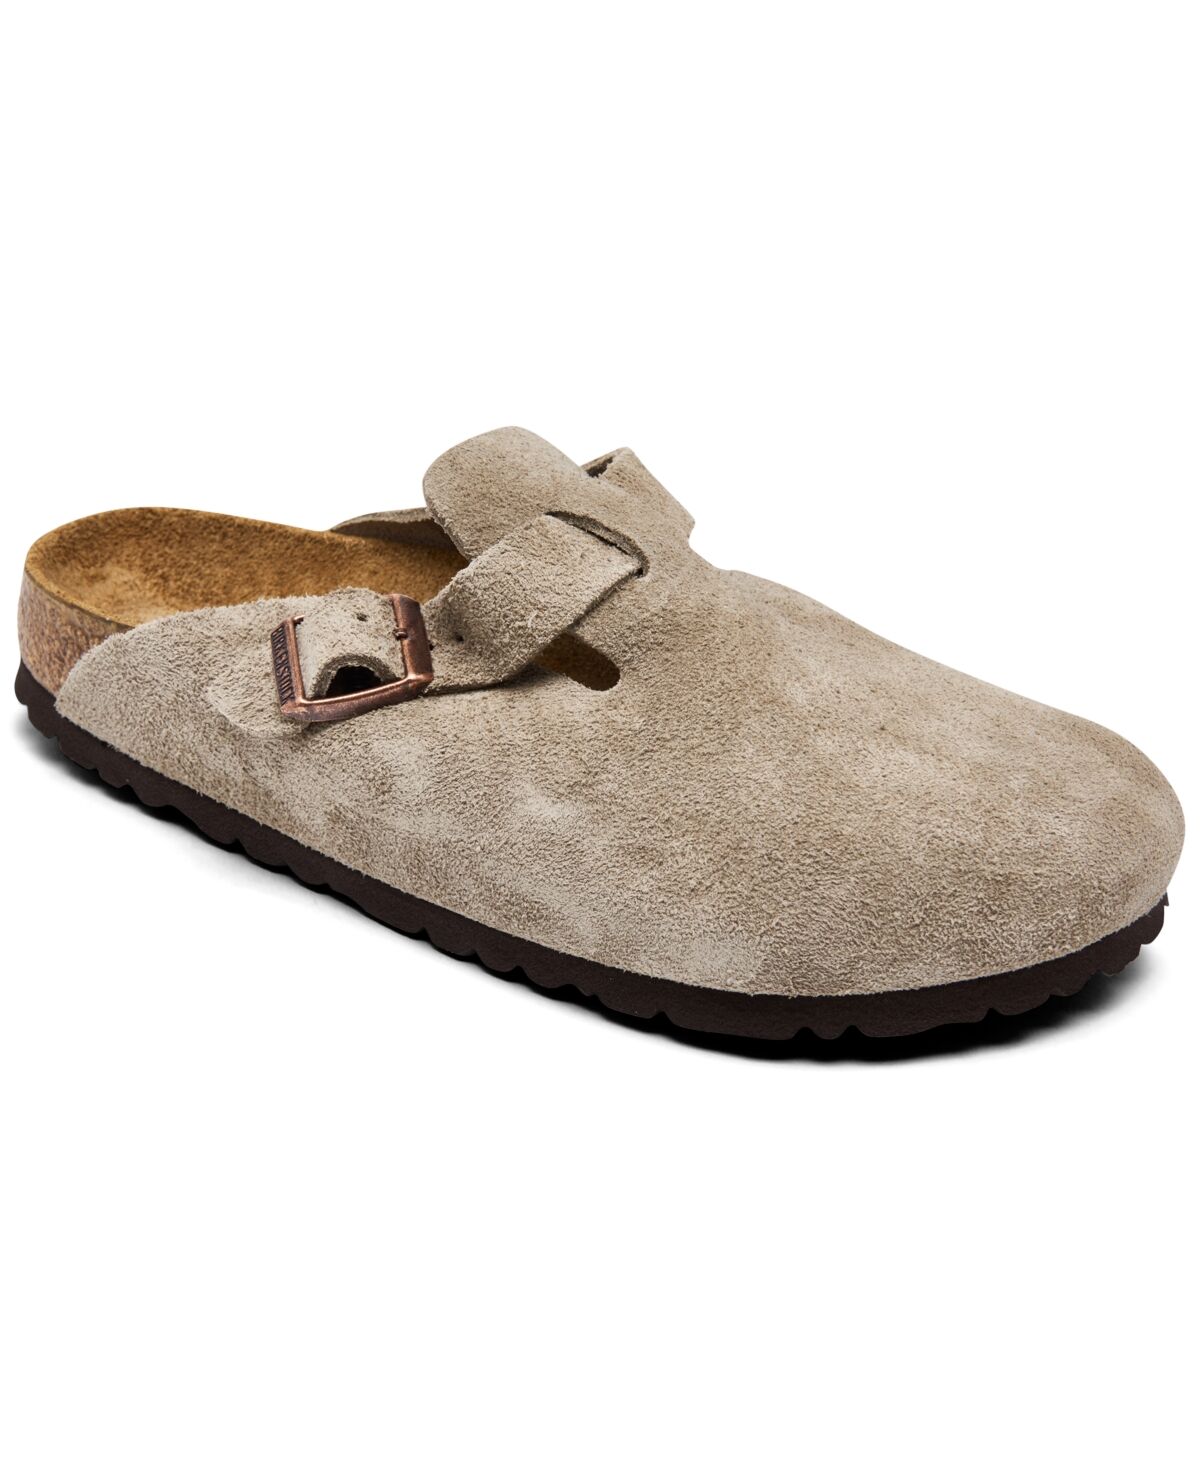 Birkenstock Women's Boston Soft Footbed Suede Leather Clogs from Finish Line - Beige